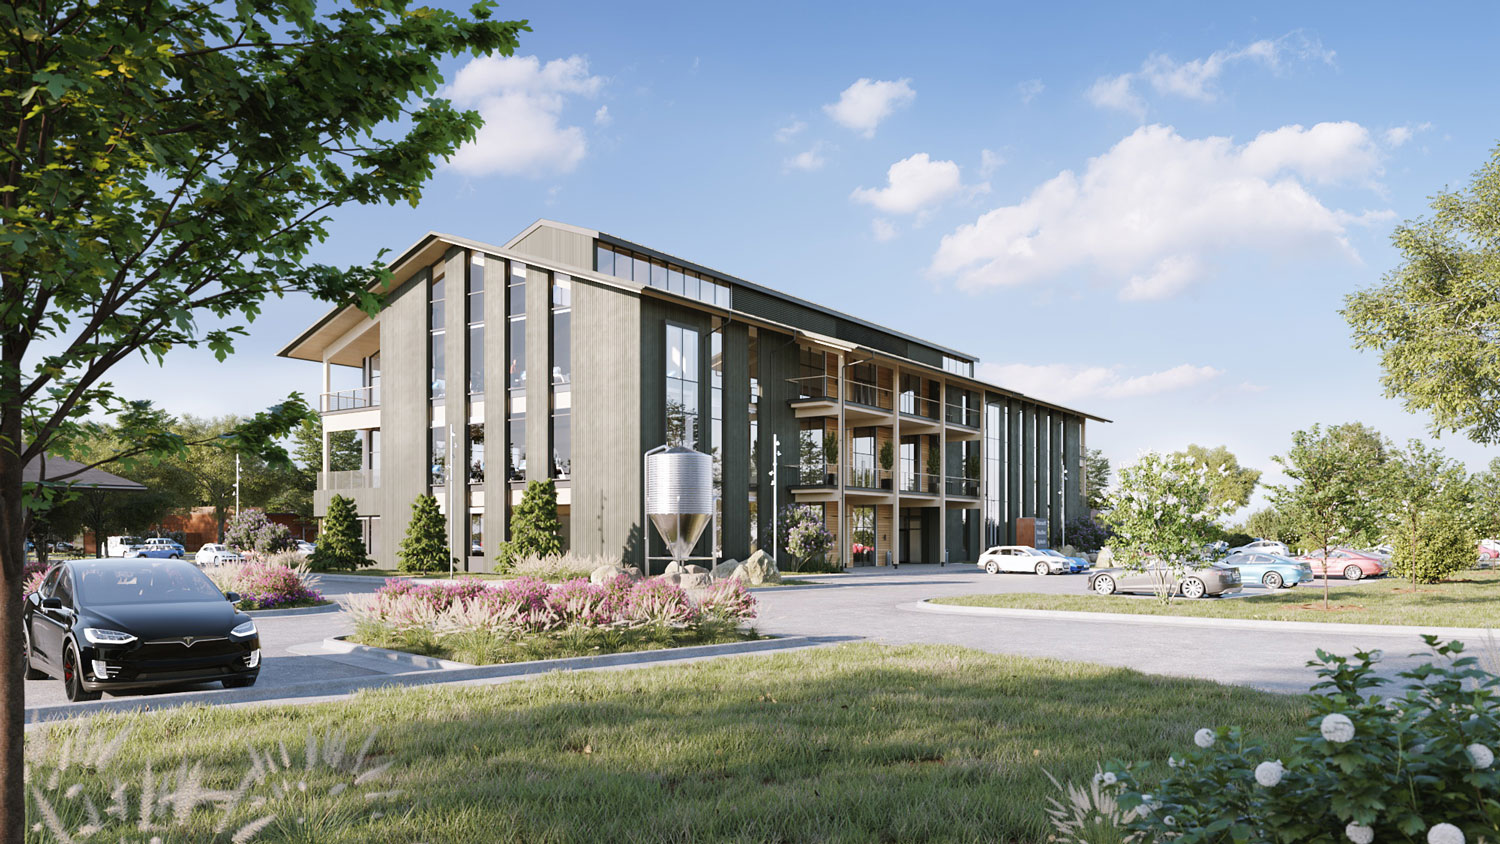  Bridgeland Breaks Ground on First Mass Timber Office Building in Greater Houston